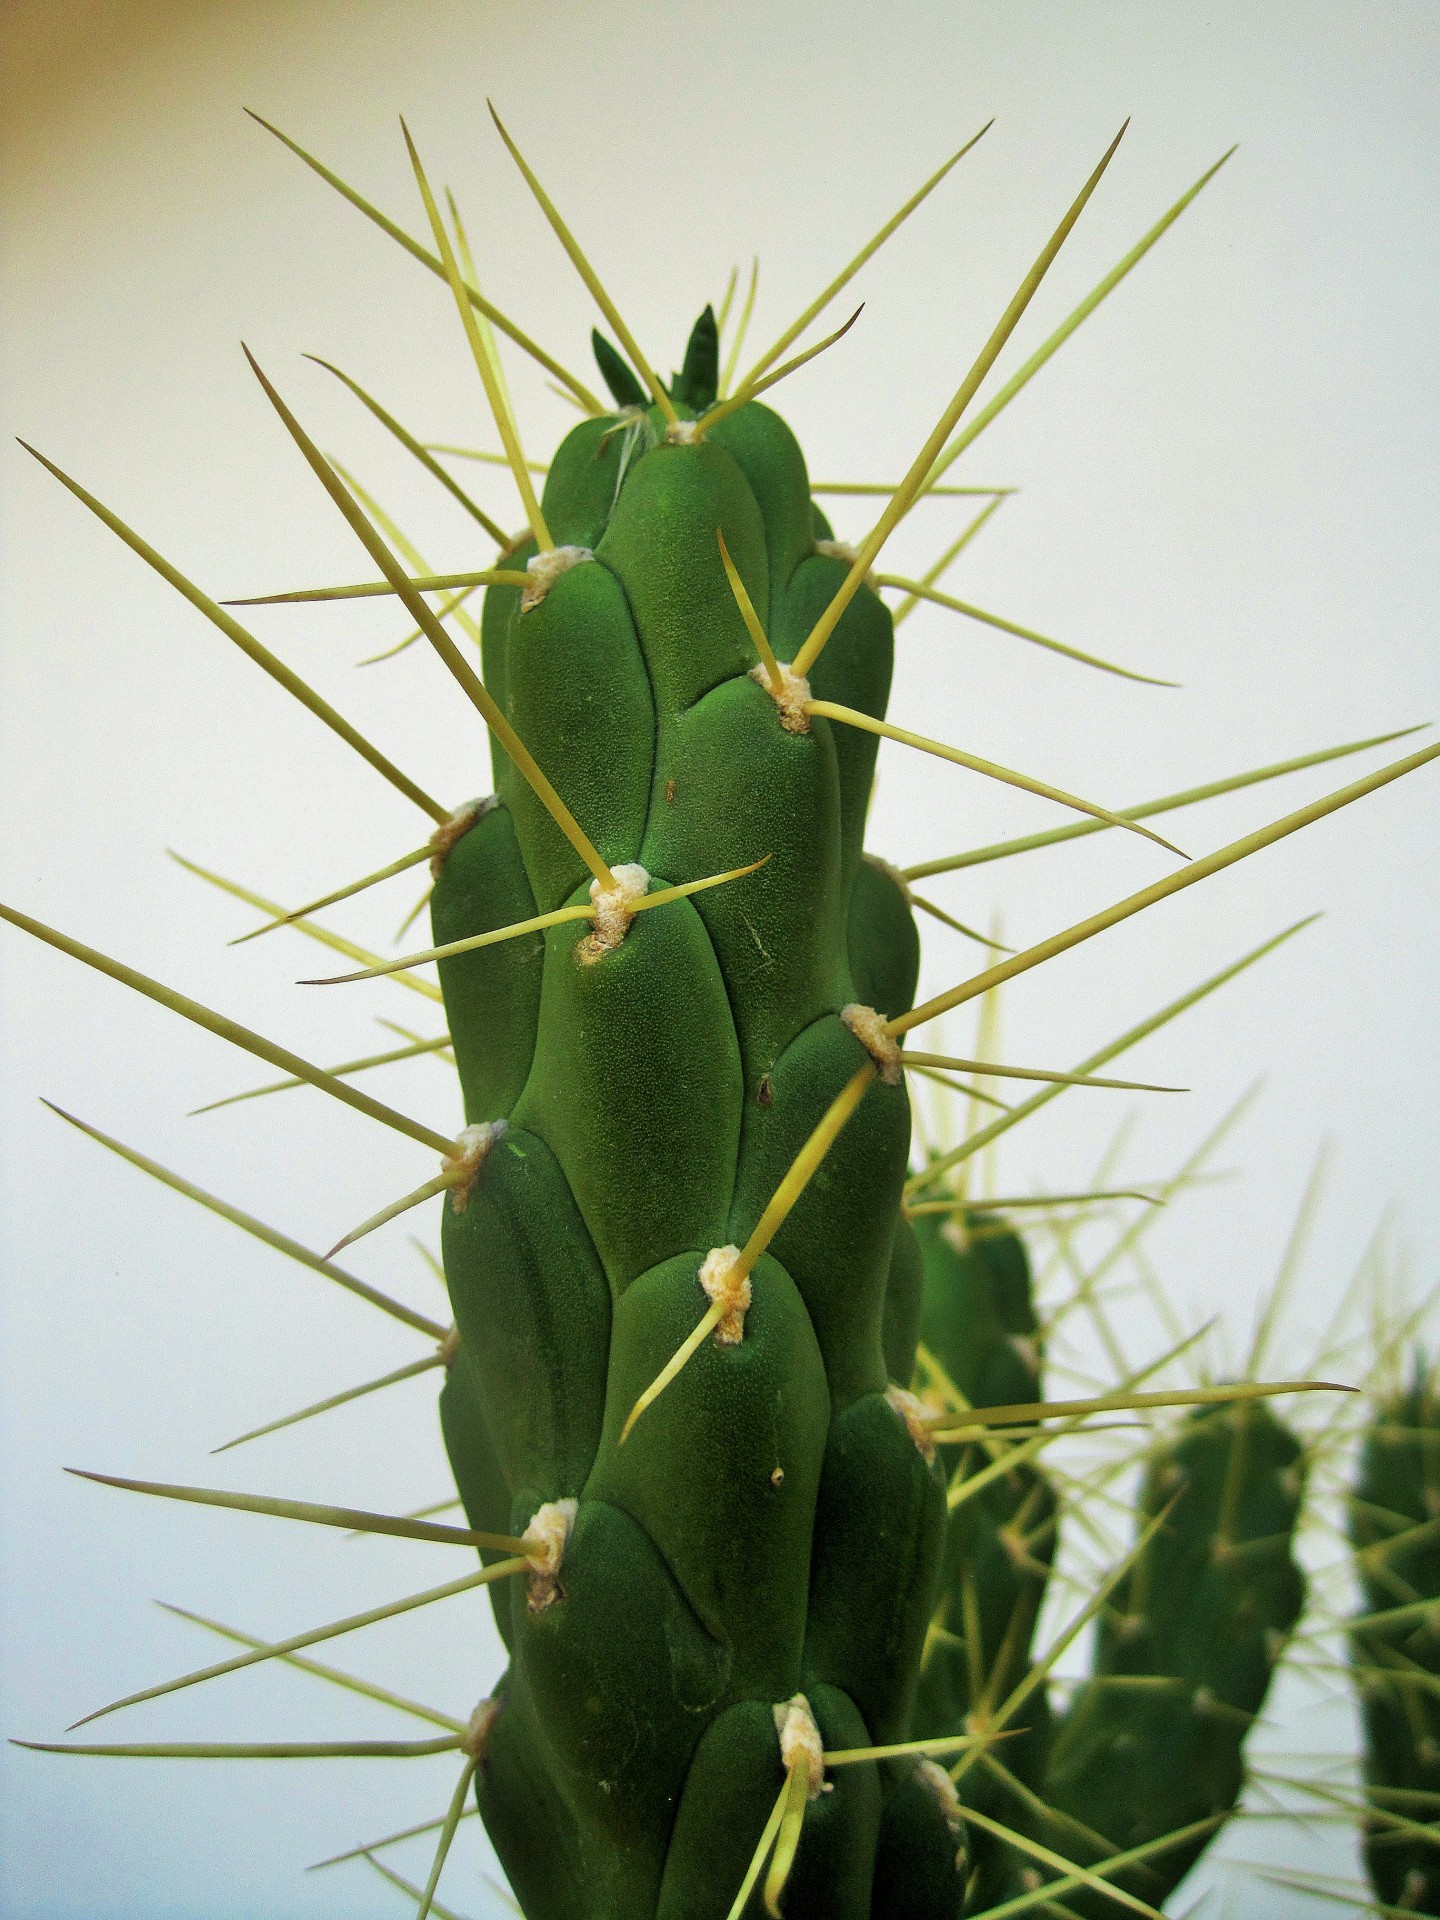 long thorns on cactus